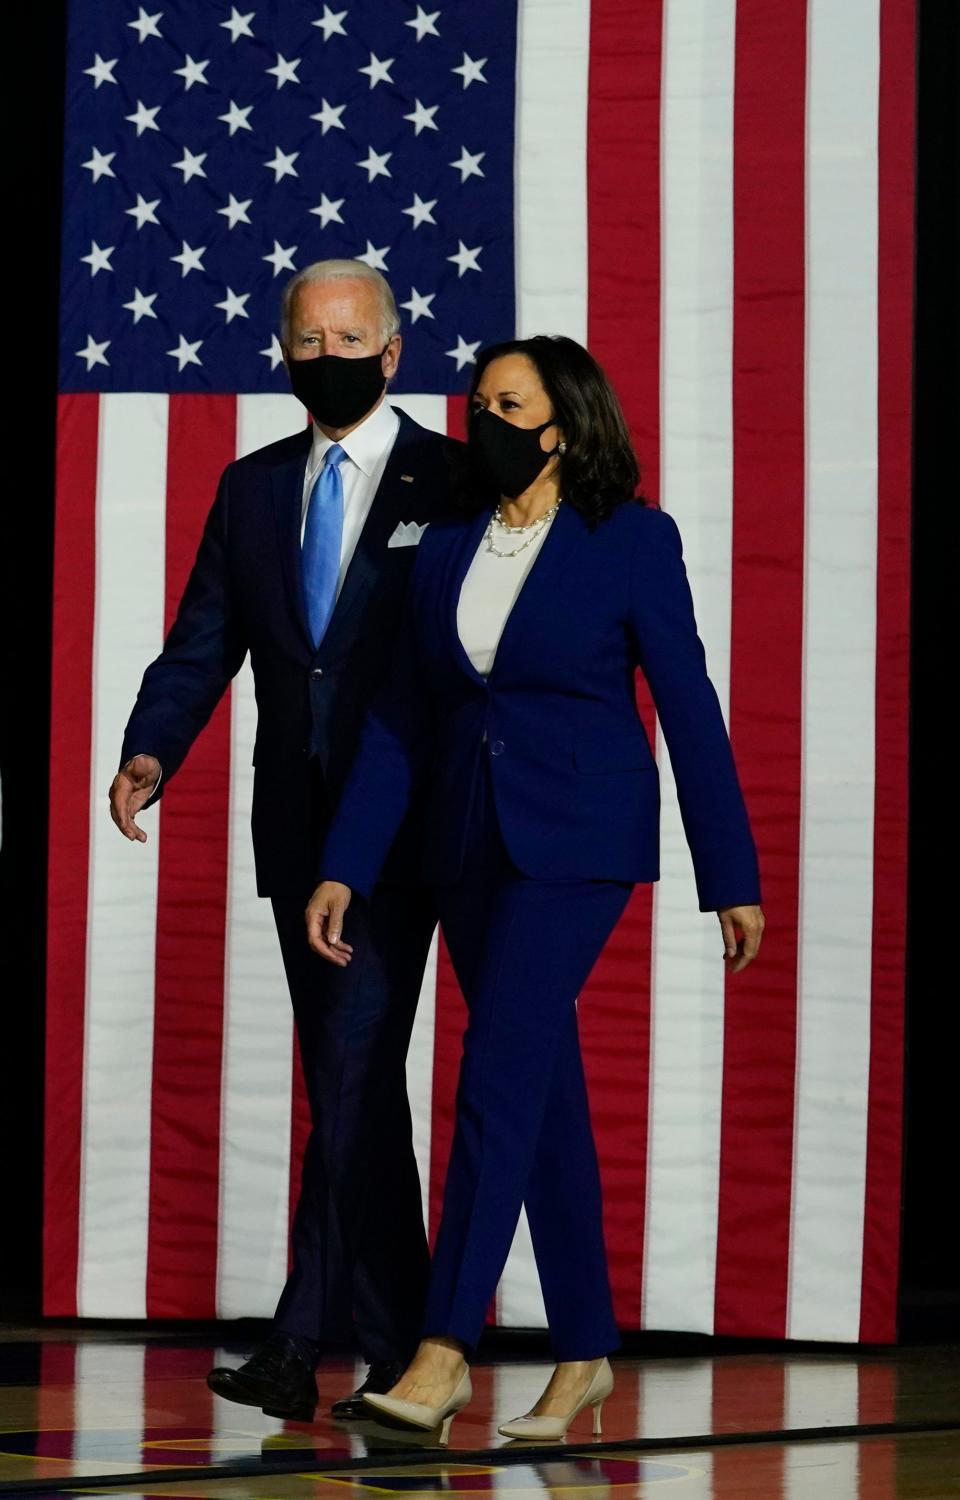 Democratic presidential candidate Joe Biden and his running mate, Sen. Kamala Harris, arrive for a campaign event at A.I. du Pont High School in Greenville, Del., on Aug. 12.